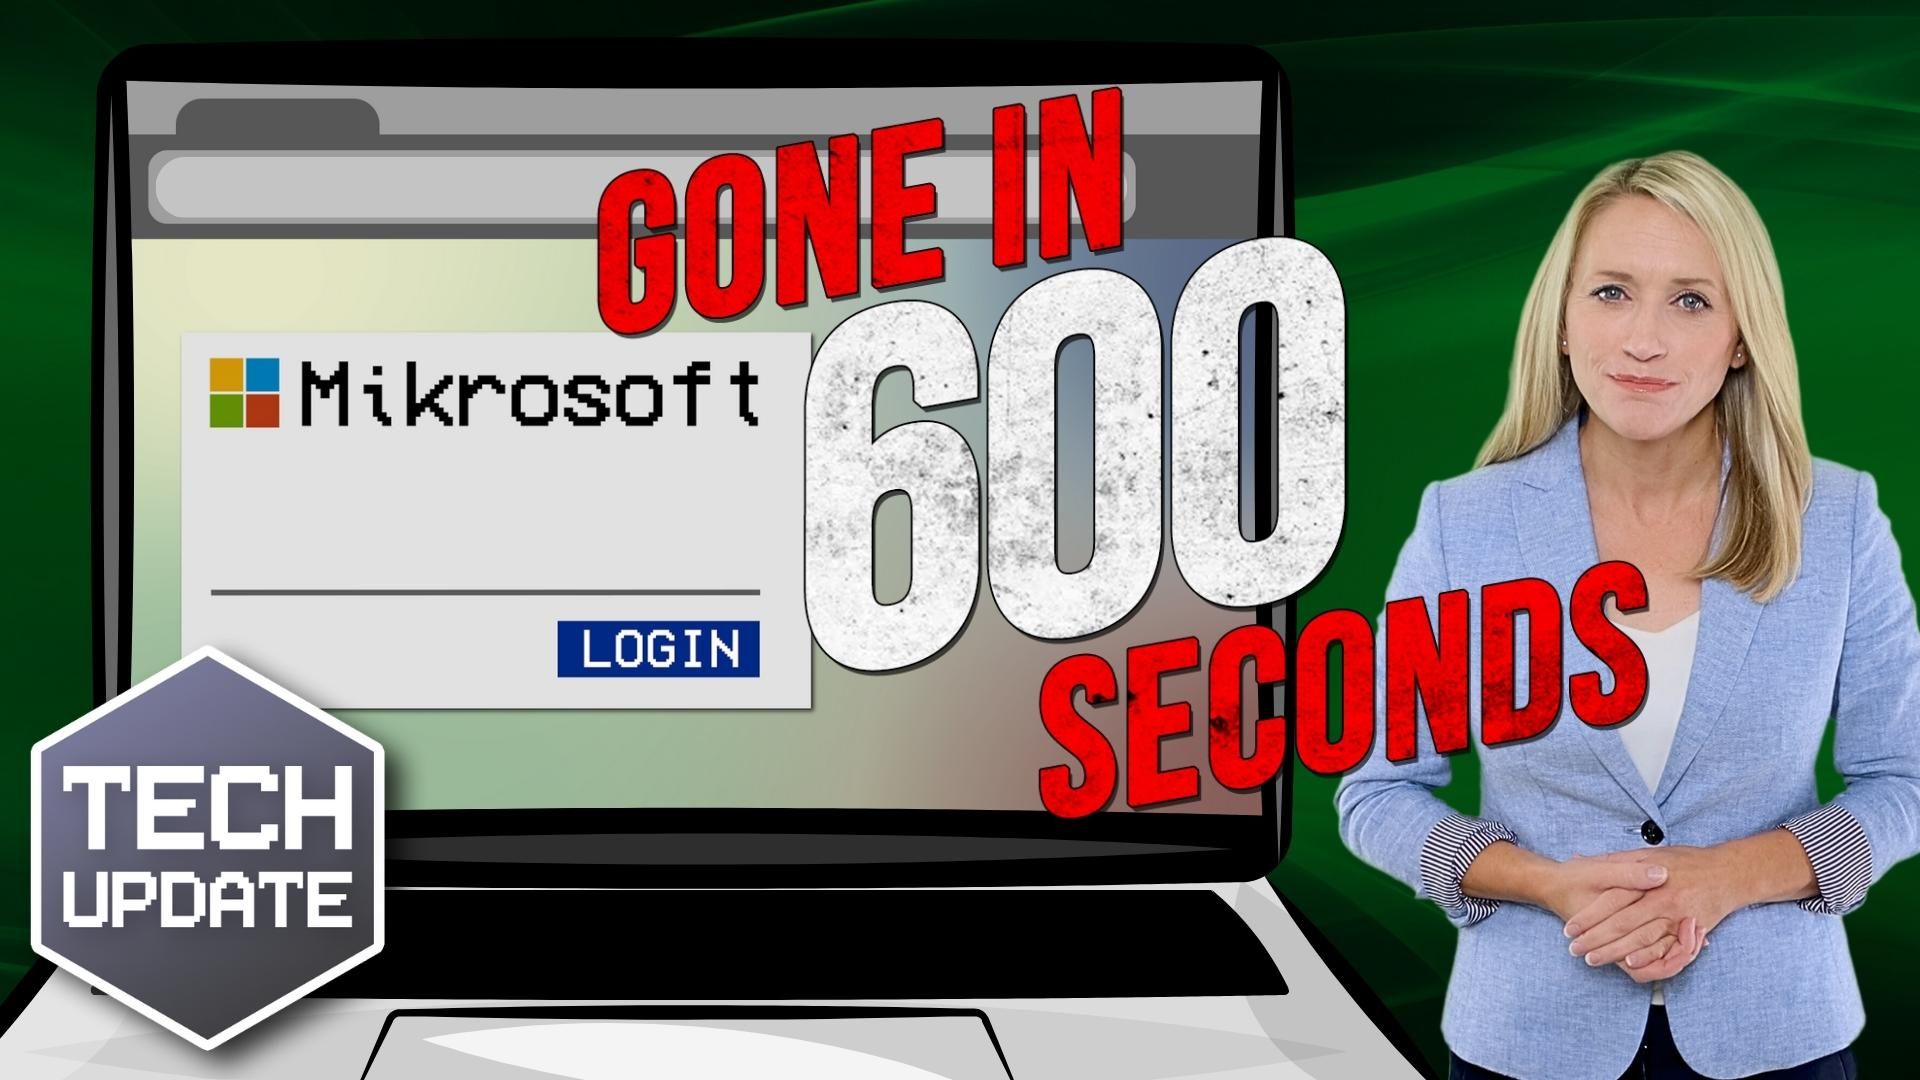 That phishing site? Gone in 600 seconds